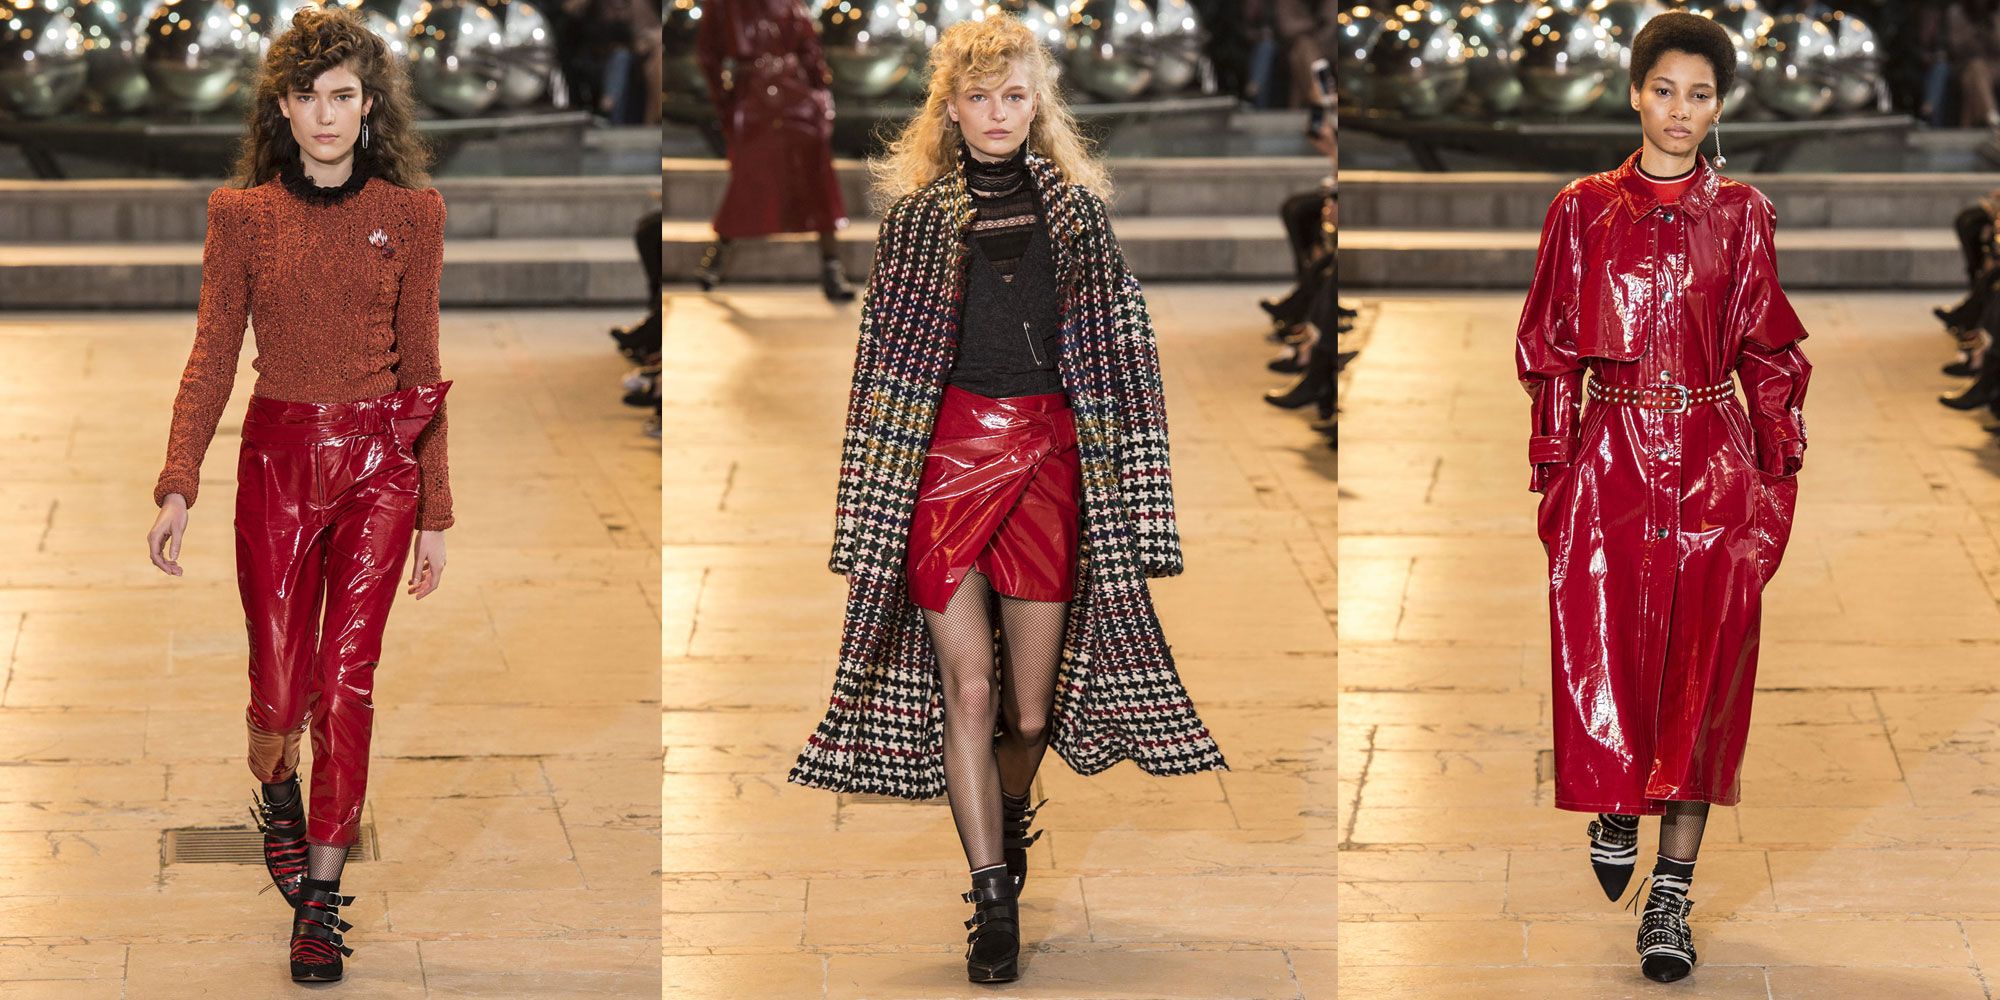 4 Totally Awesome '80s Styles Isabel Marant Will Convince You to